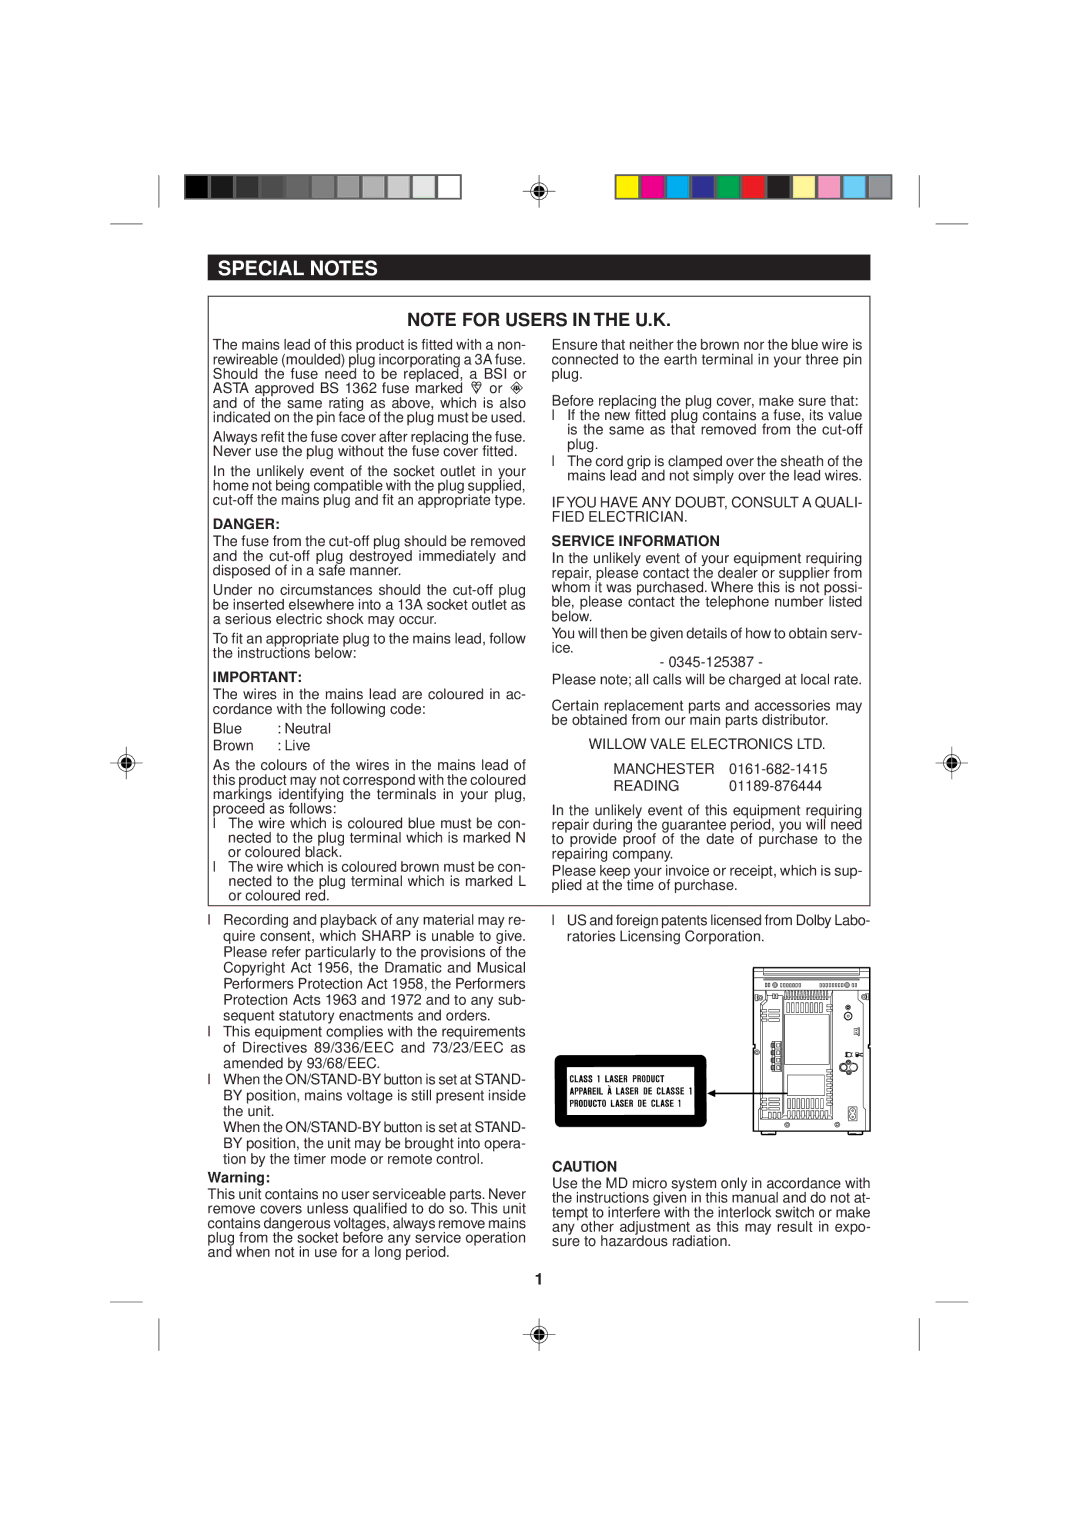 Sharp MD-M2H operation manual Special Notes, Service Information 